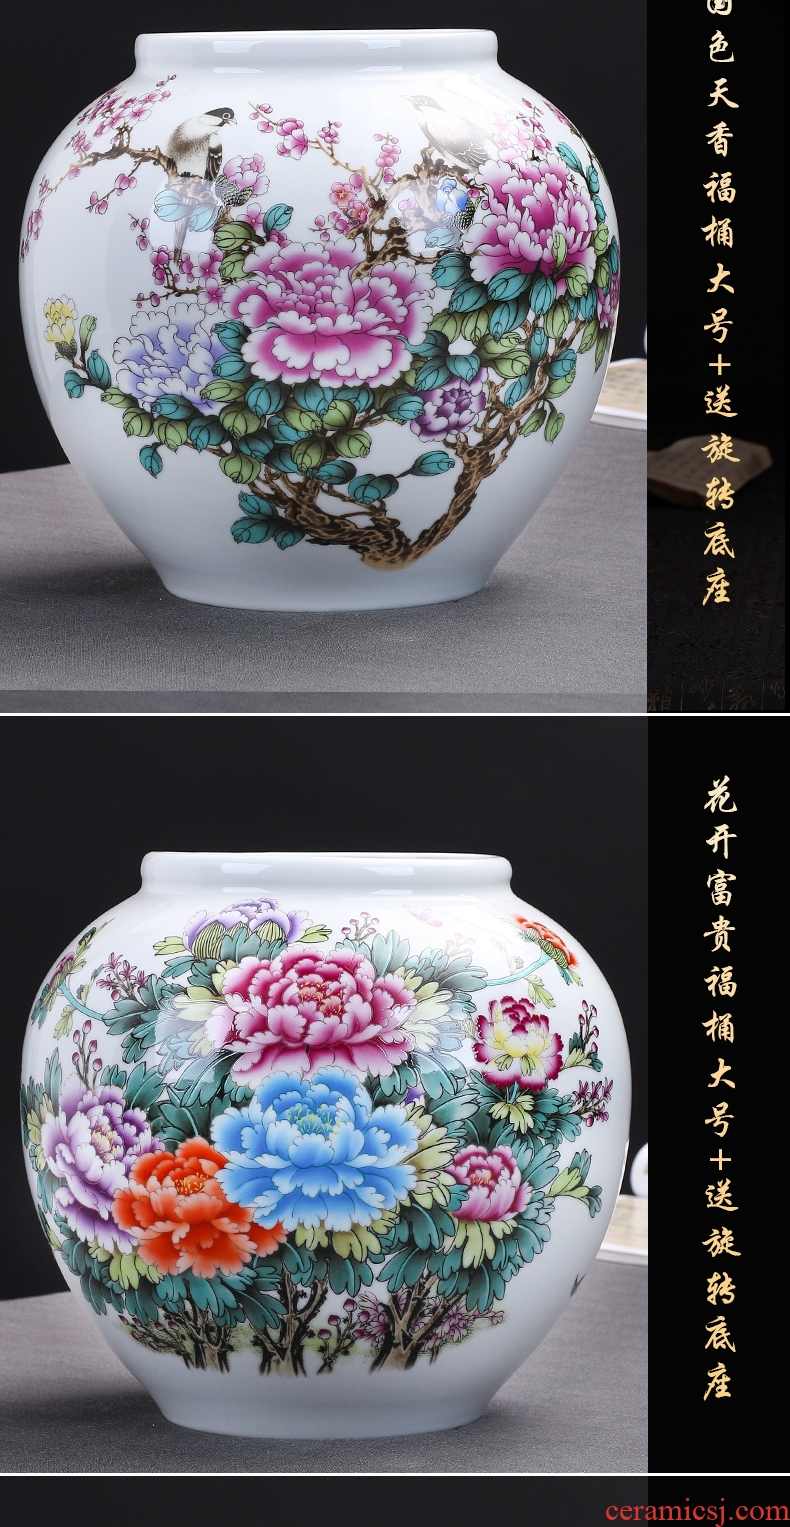 Jingdezhen hand - made general blue and white porcelain jar ceramic vase furnishing articles large Chinese style living room home decoration - 570451101191